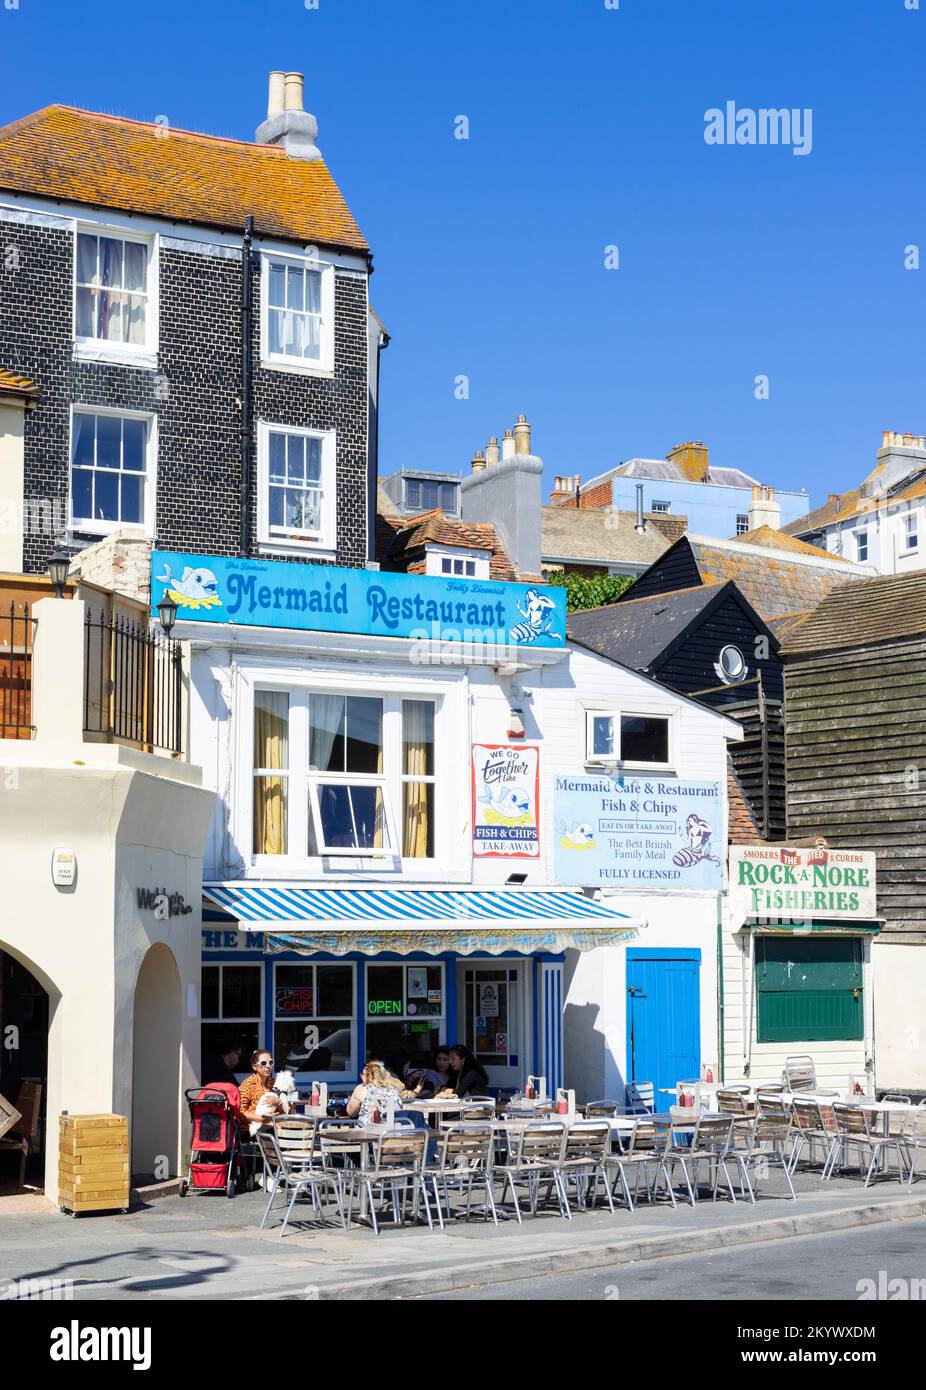 Hastings Old Town Mermaid restaurant et plats à emporter sur Rock-a-nore Road Hastings Old Town Hastings East Sussex Angleterre GB Europe Banque D'Images